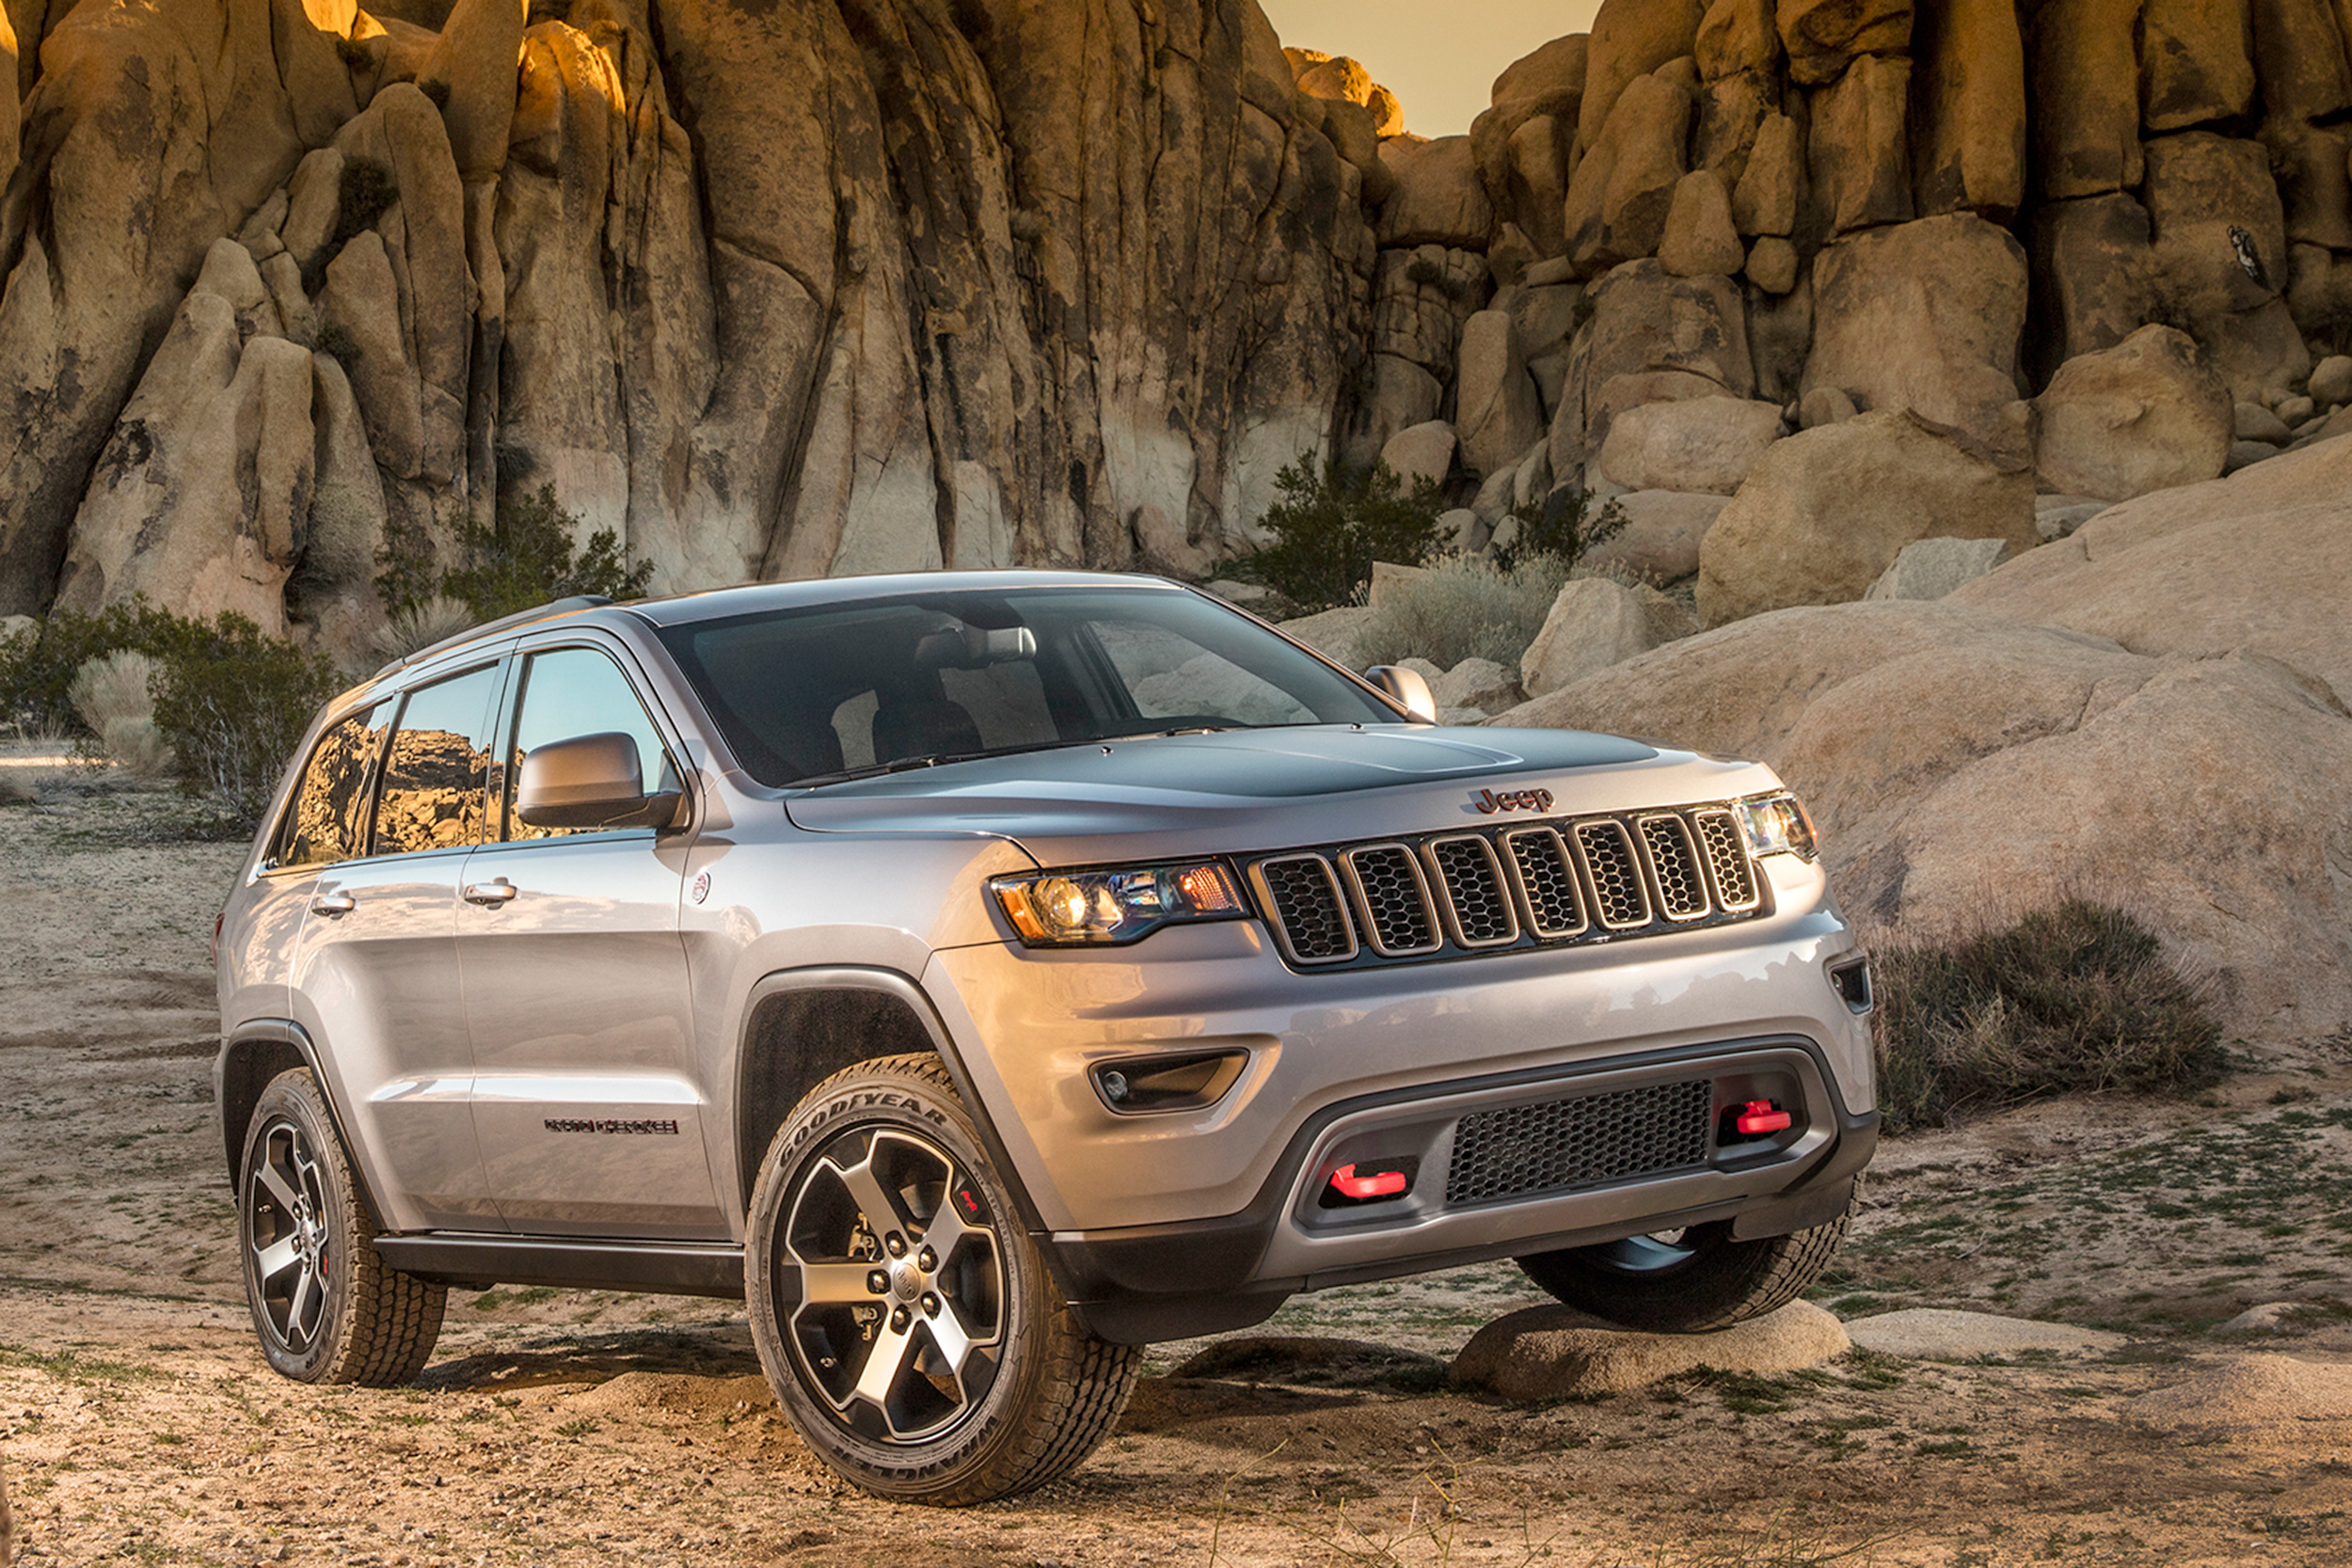 Jeep Grand Cherokee Overland 4WD 2017 International Price & Overview